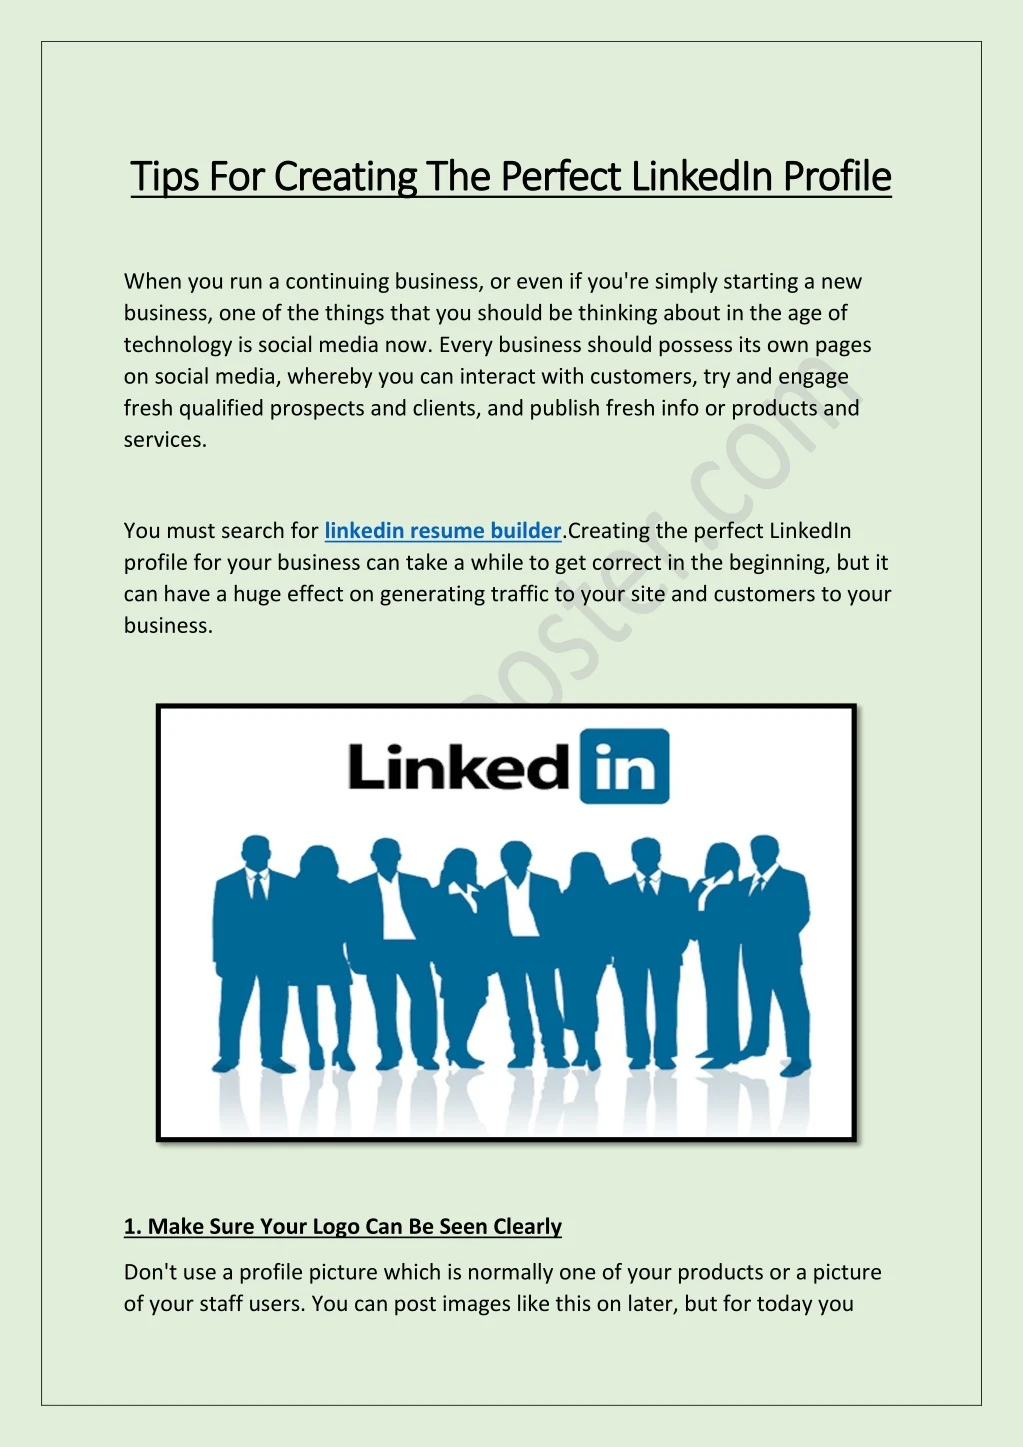 tips for creating the perfect linkedin profile